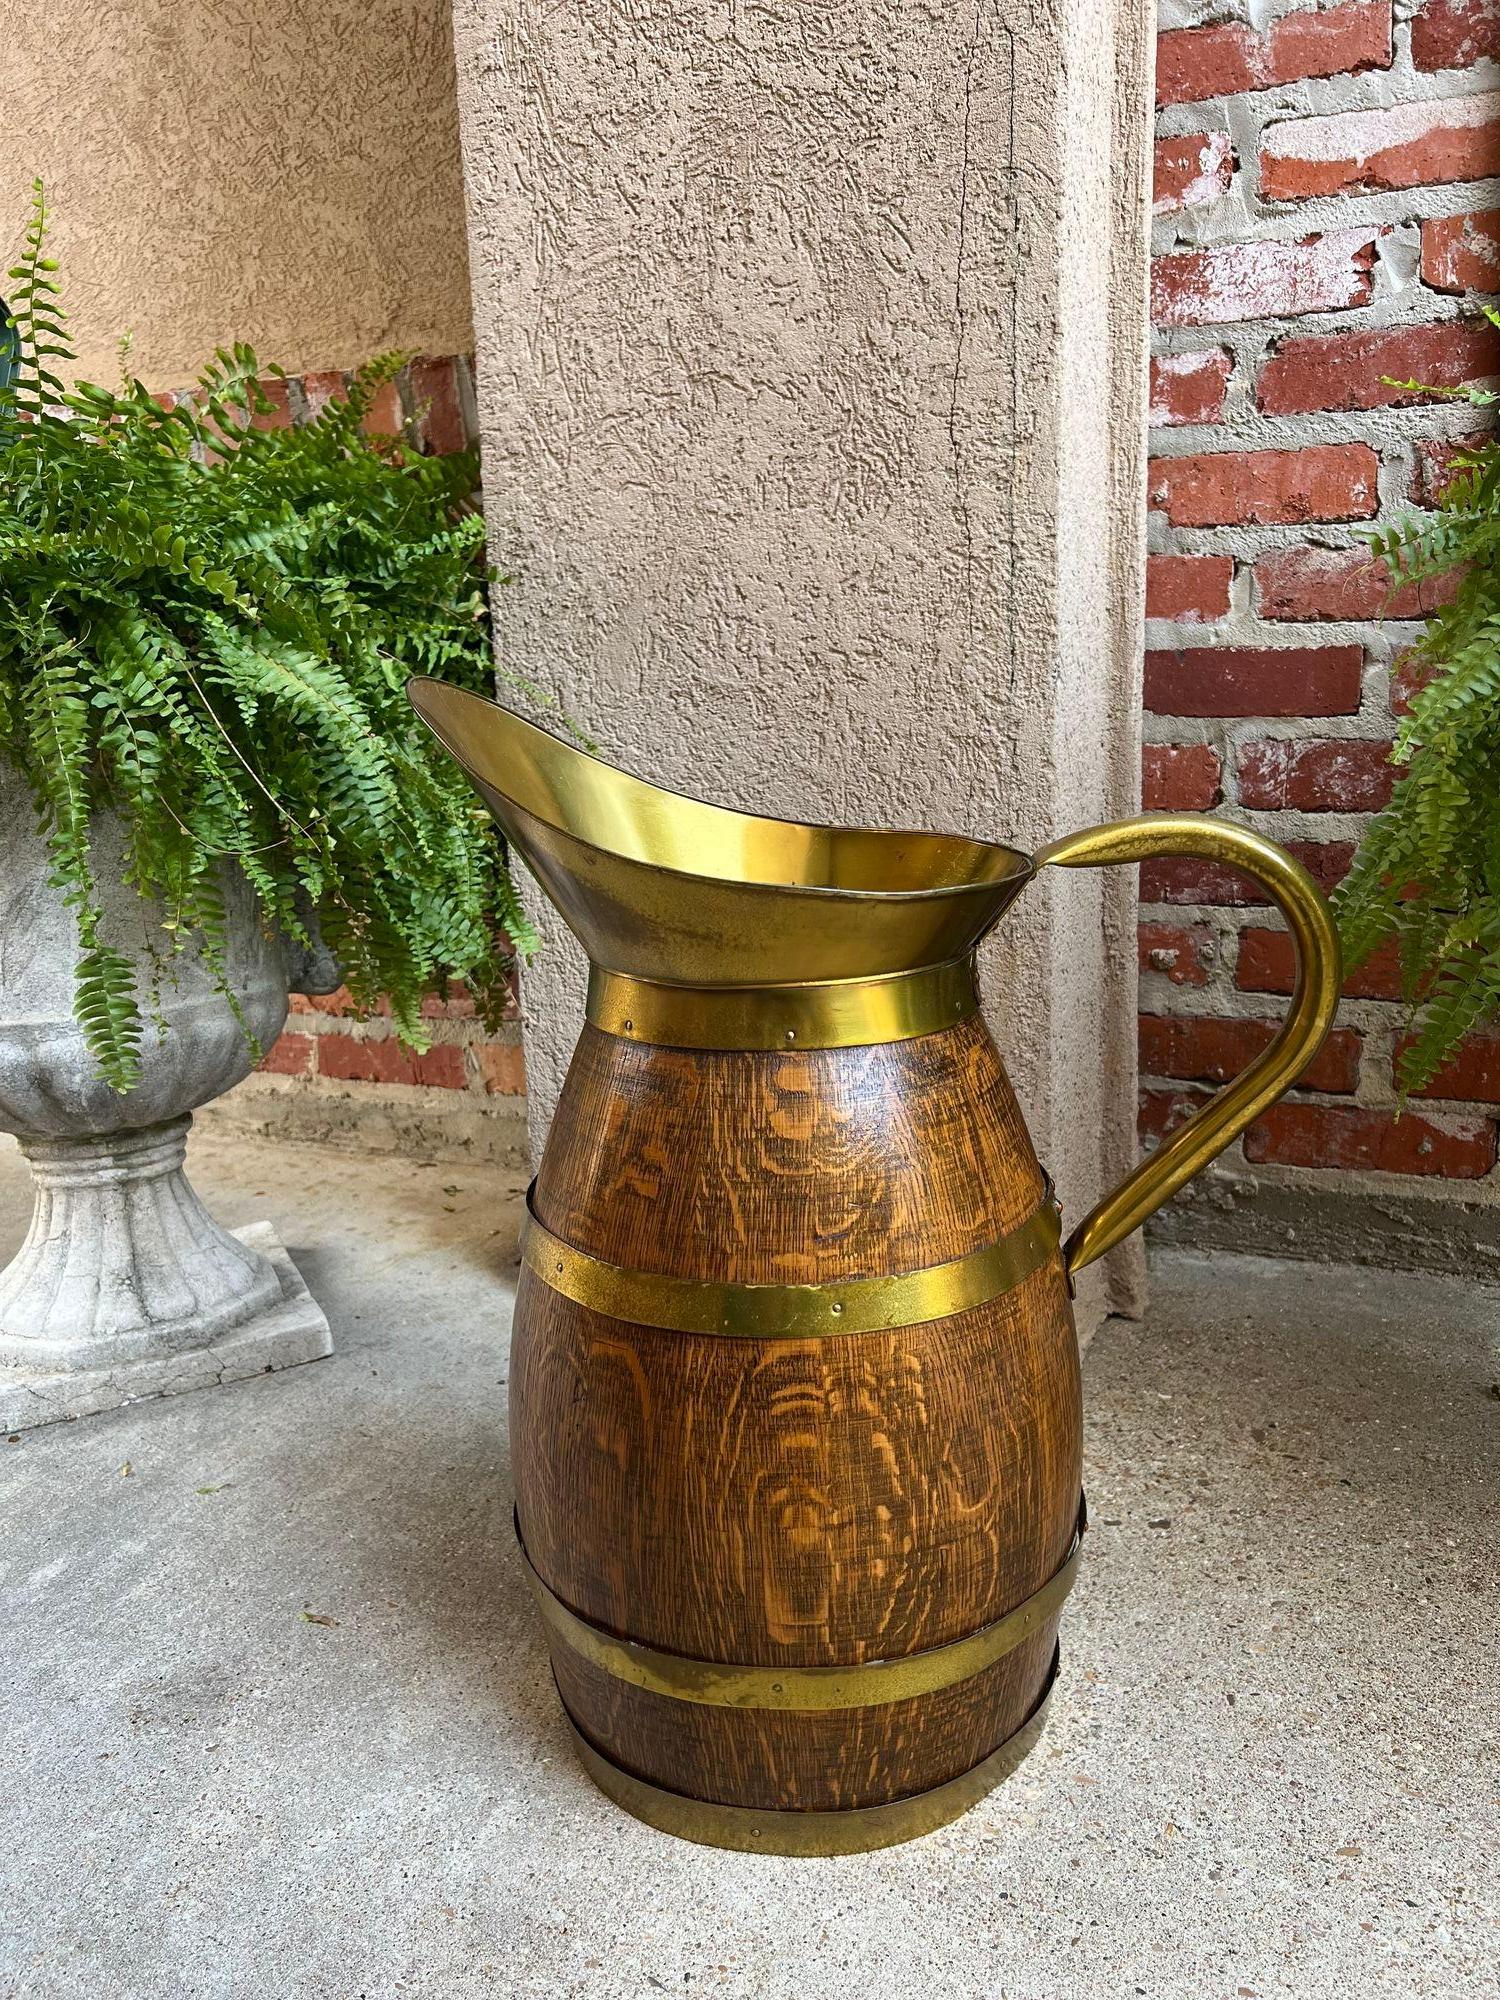 Antique Large French Country Oak Pitcher Brass Band Wine Barrel Umbrella Stand.

Direct from France, a beautiful antique French farm pitcher or vessel, with SOLID OAK staves. Customers love these jugs for farm table décor, umbrella stands, planters